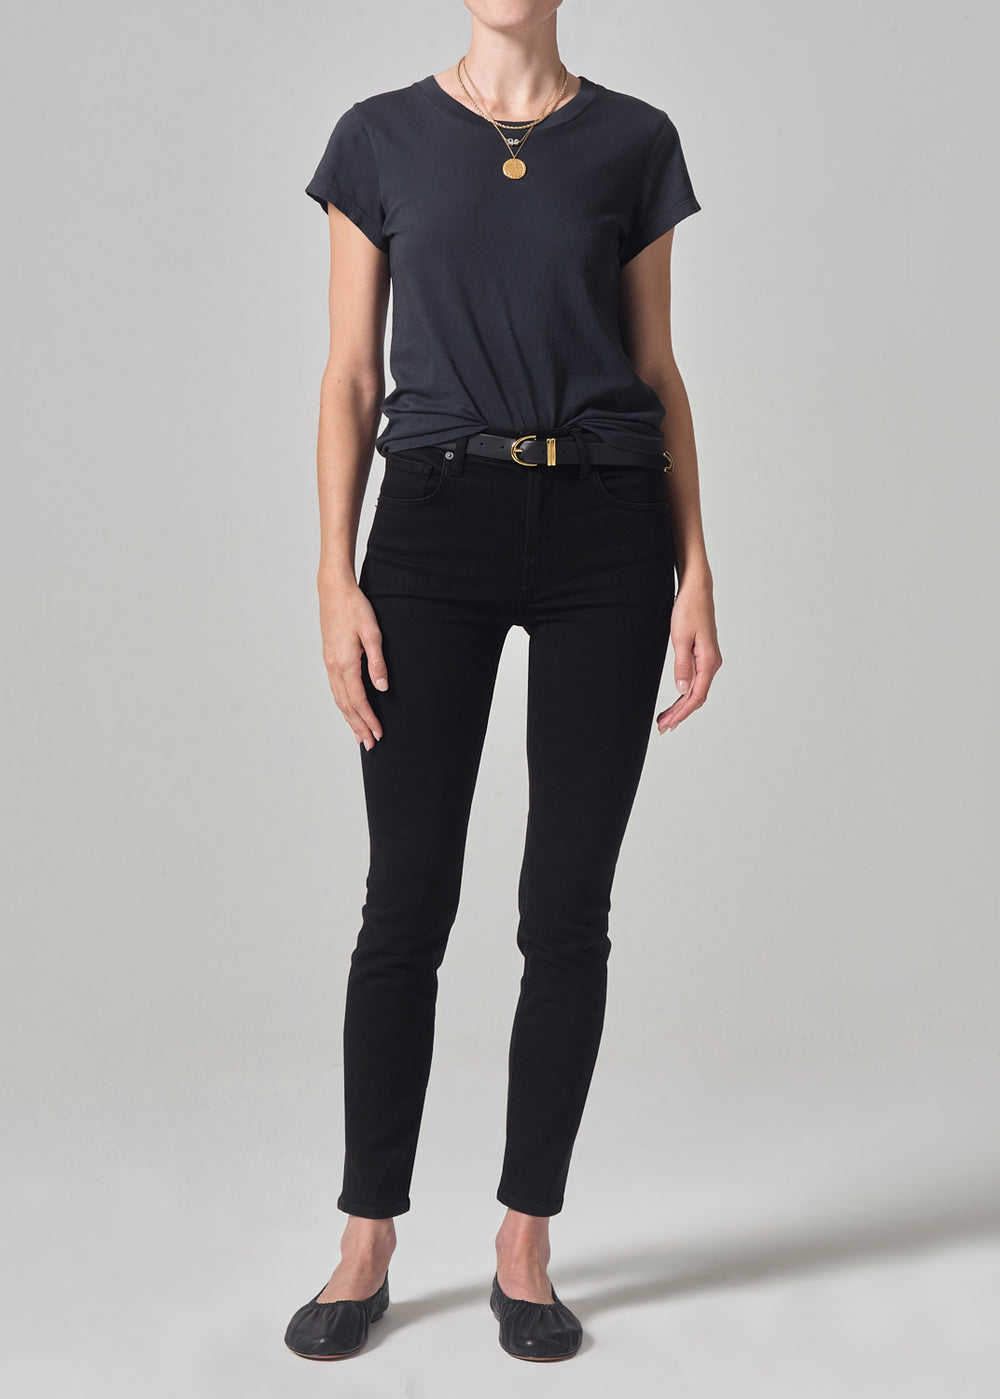 Jeans Sloane Skinny in Plush BlackCitizens of Humanity - Anita Hass